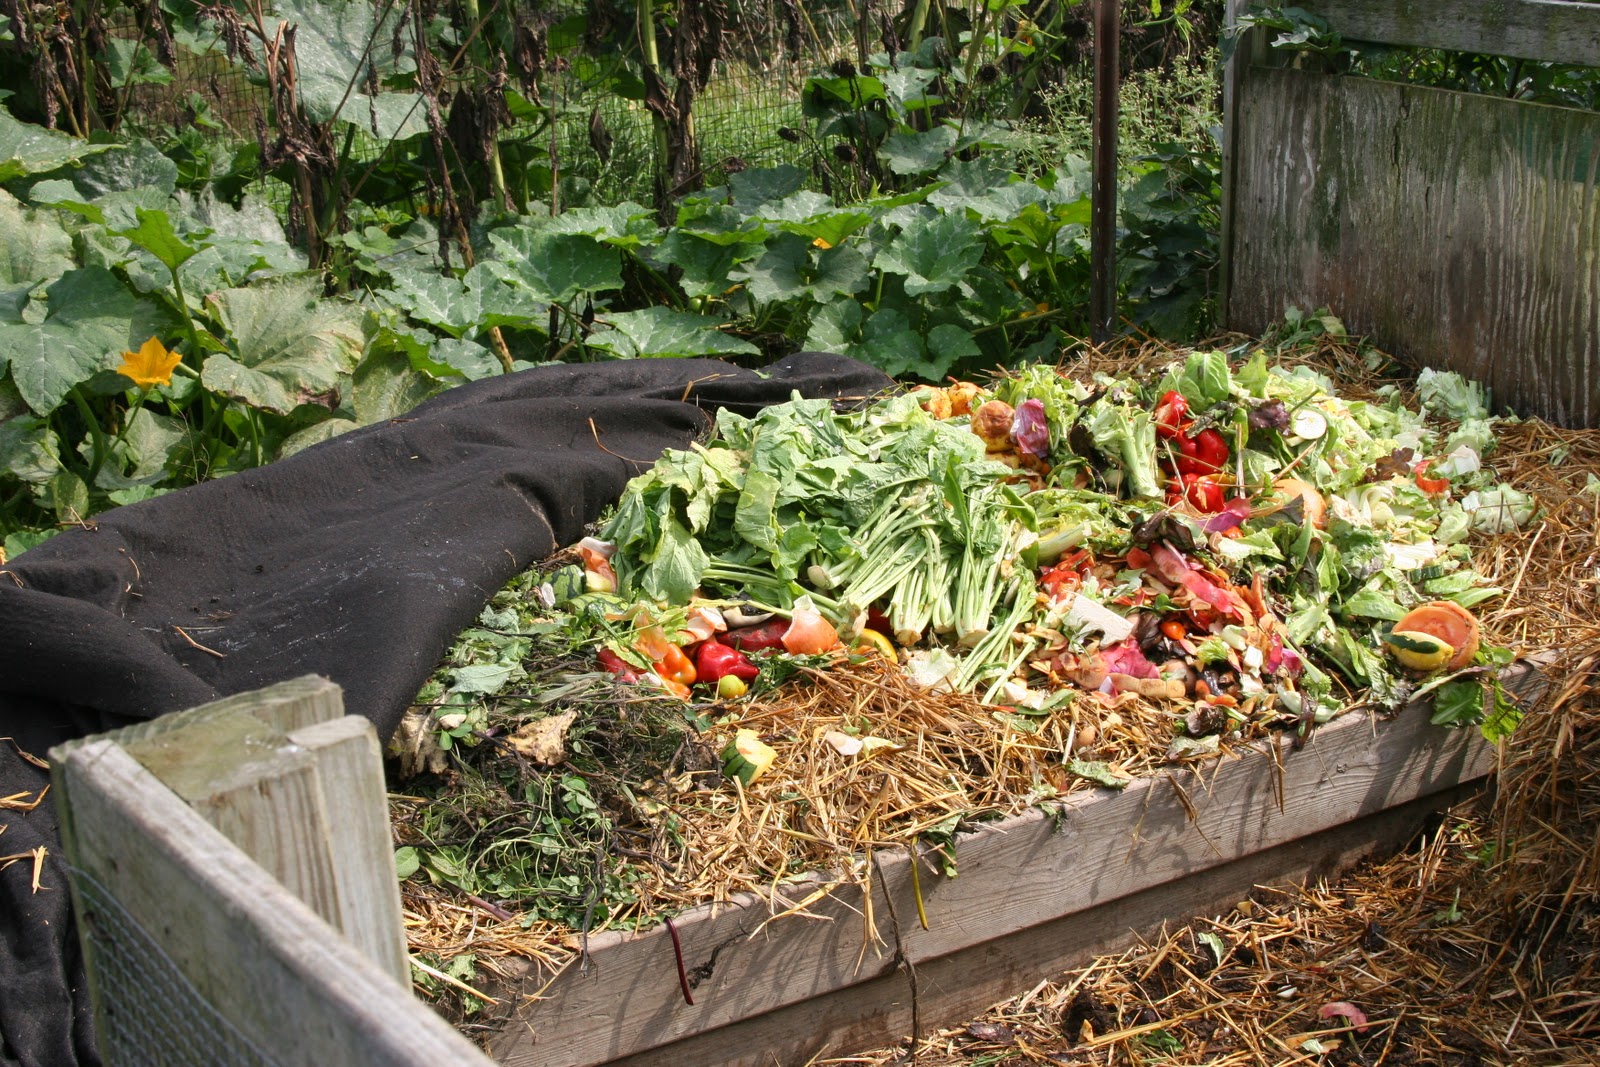 Composting is a simple way to enrich your garden soil and reduce trash.